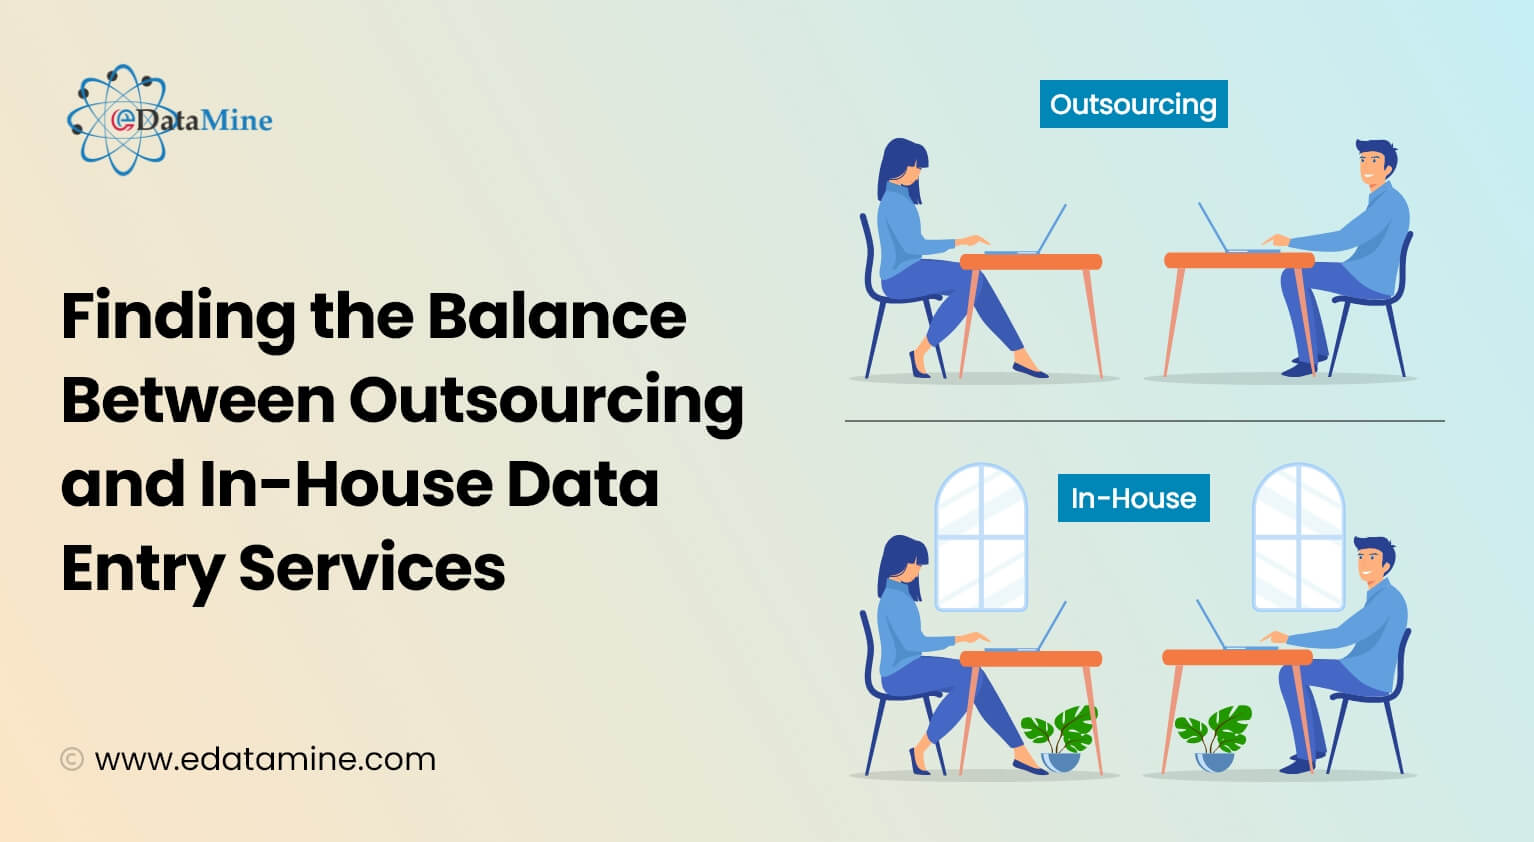 Finding the Balance Between Outsourcing and In-House Data Entry Services